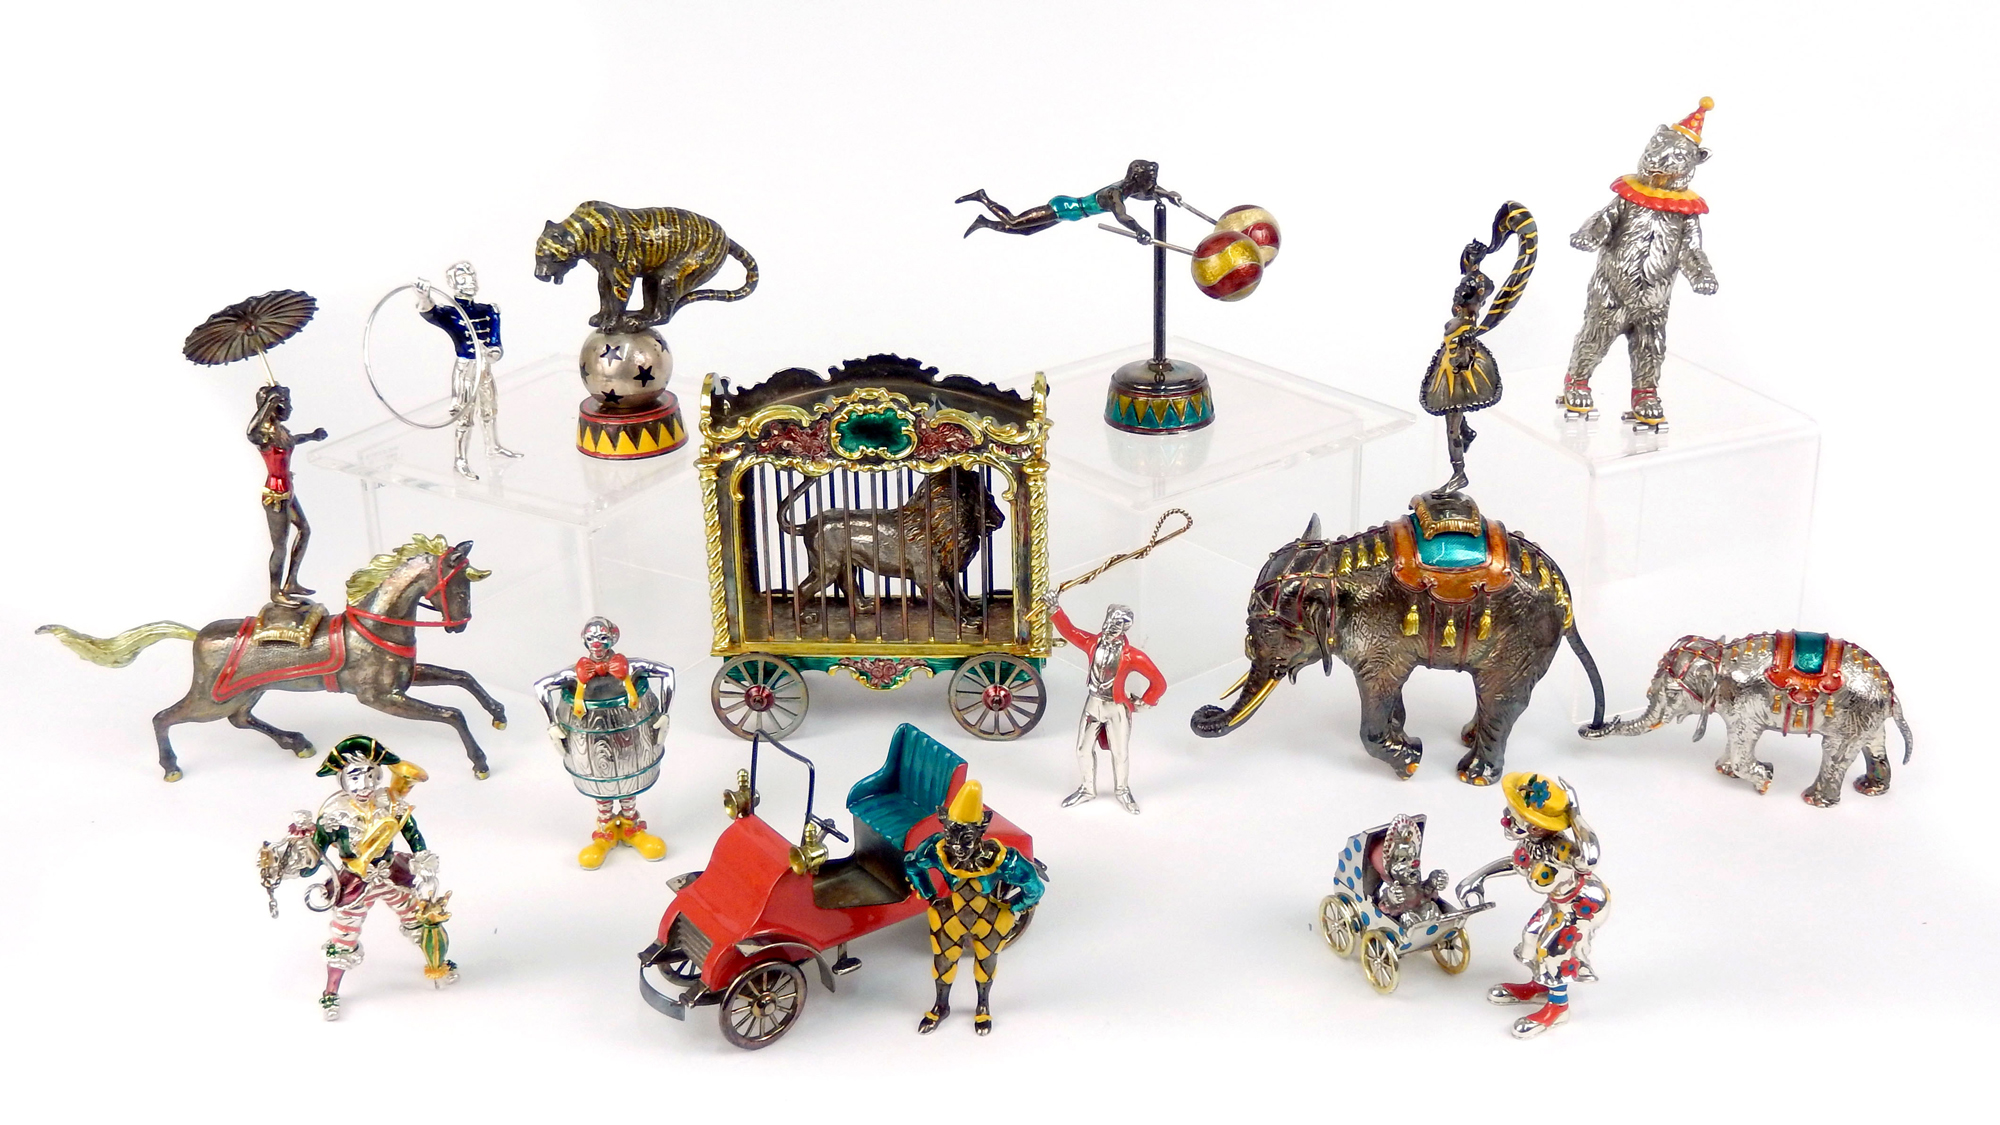 Tiffany & Co. 21-piece enameled silver Circus set, designed by Gene Moore, made in Italy, to be sold in consecutive lots as individual pieces and affinity groups. No reserve. Stephenson’s Auctioneers image